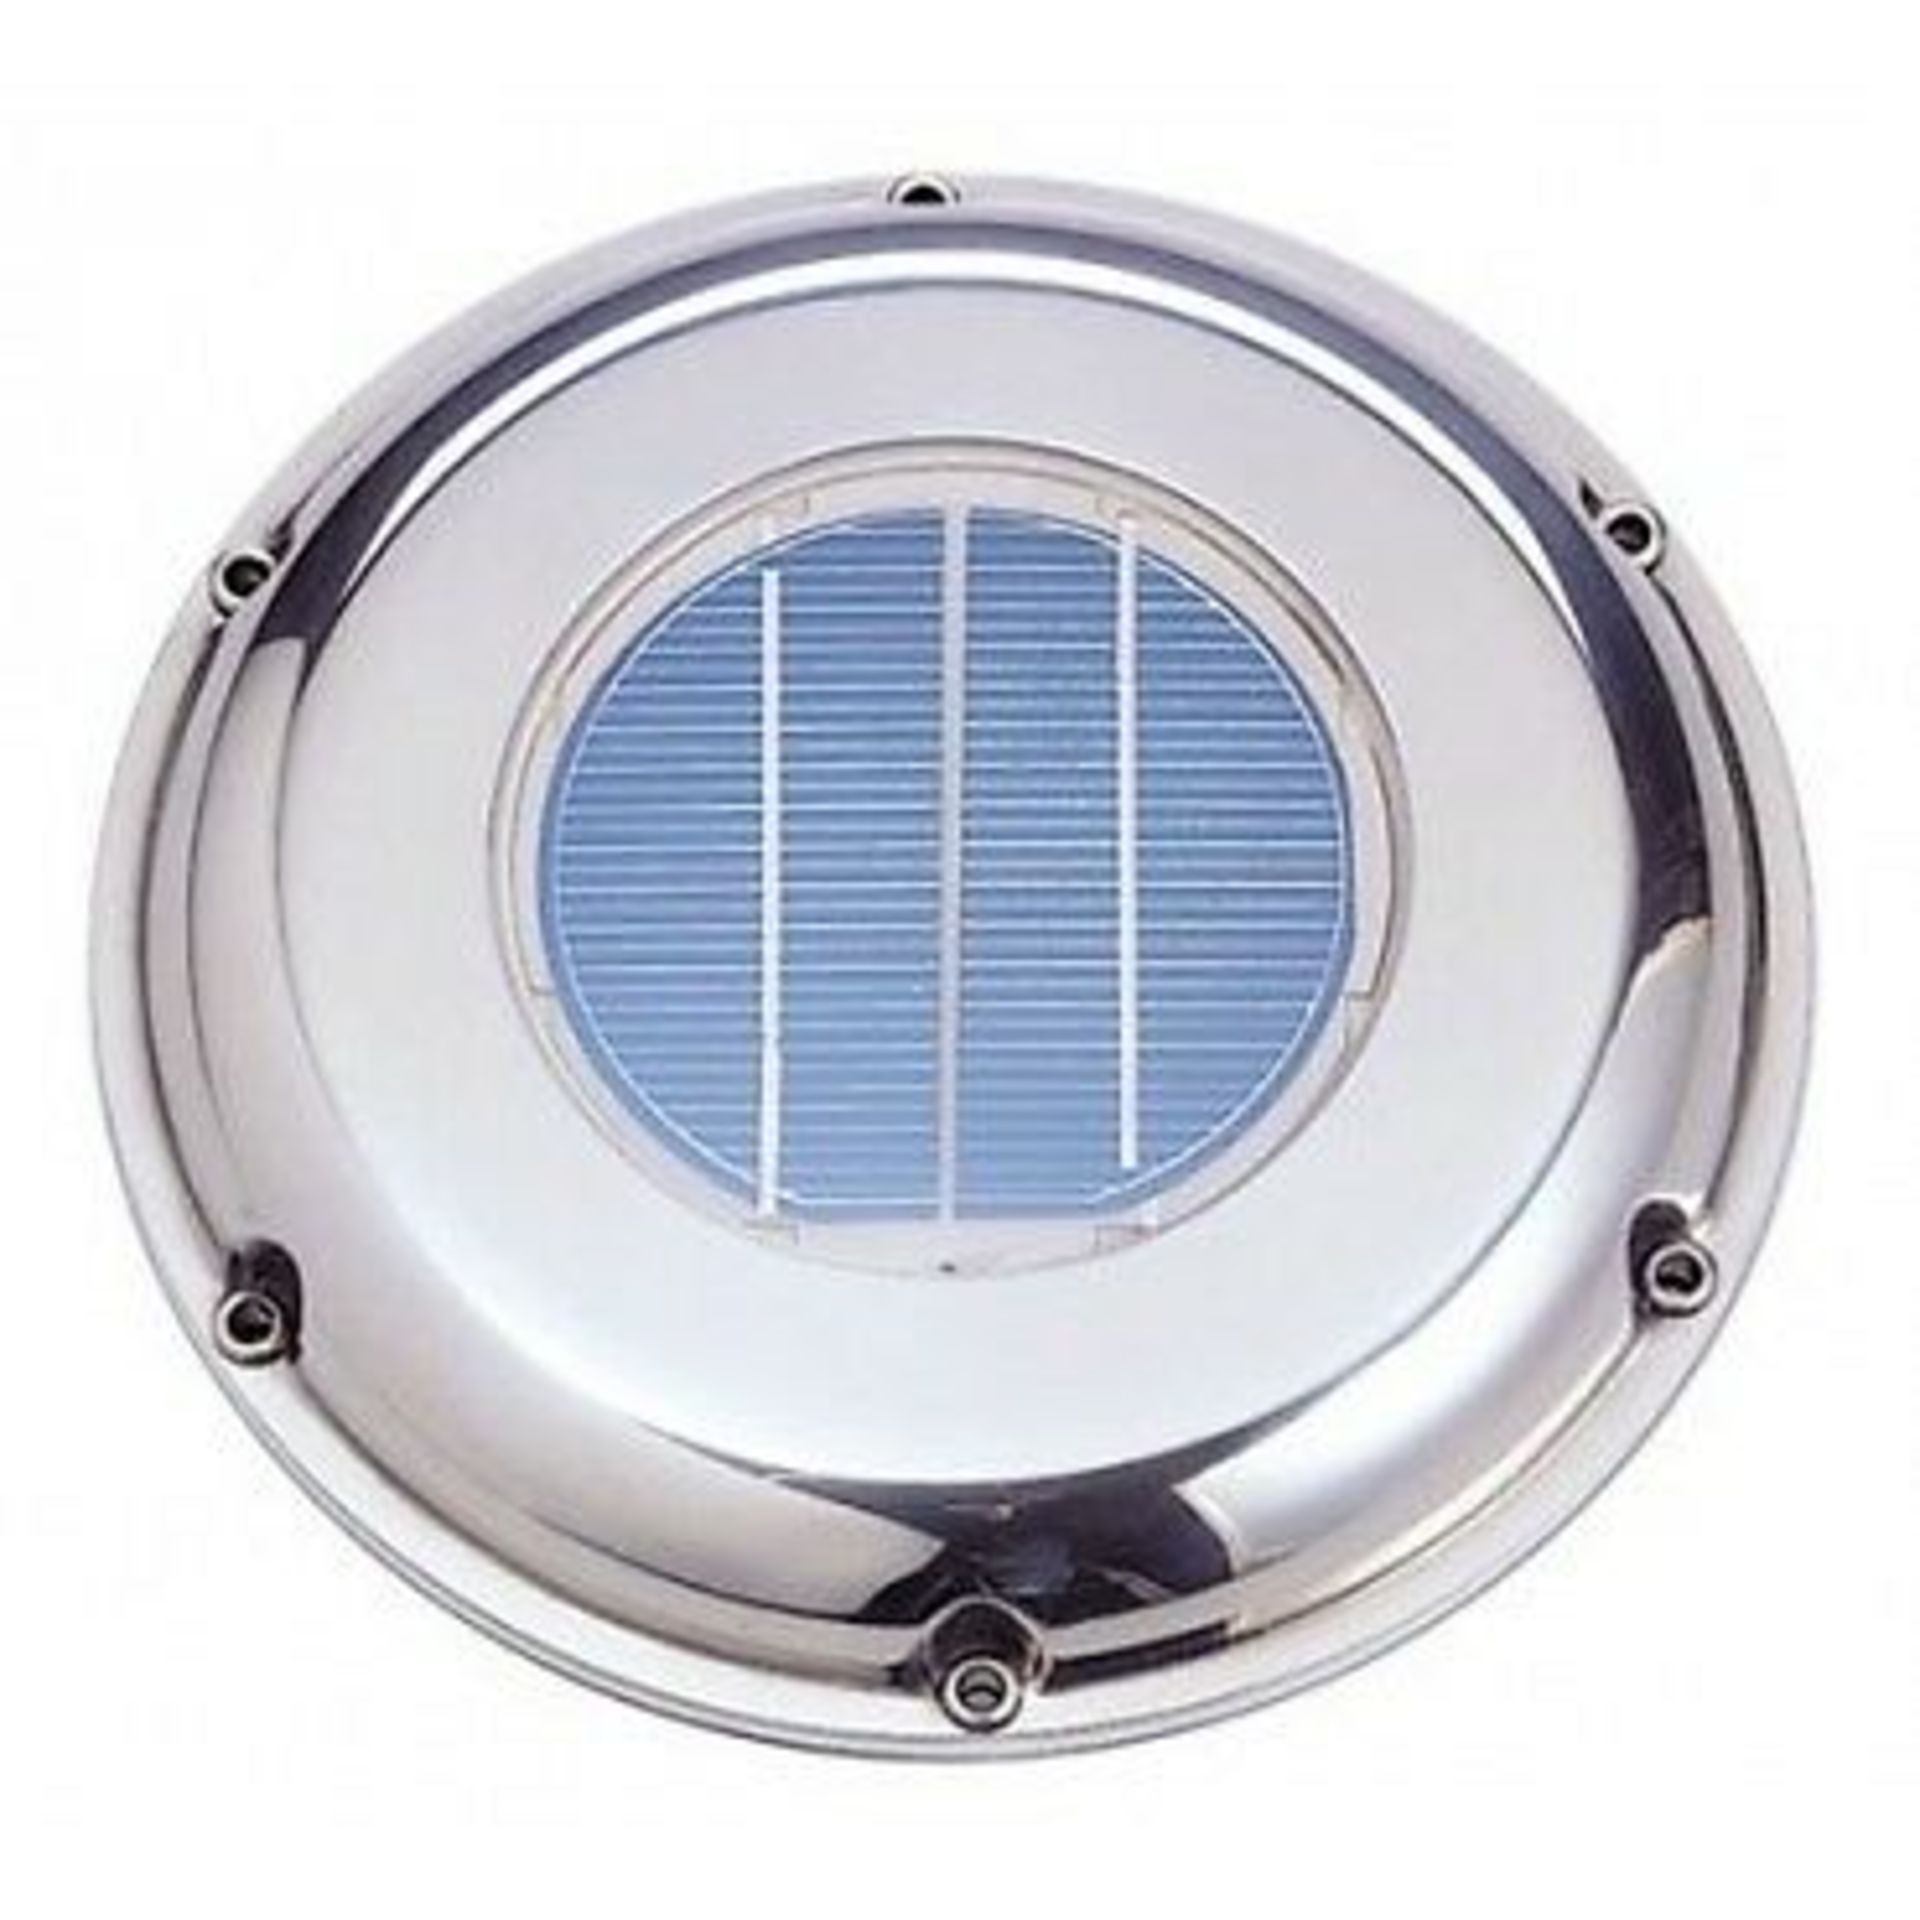 4 X Deluxe Solar Stainless Steel Vents (Zzsvt224Sr) - Image 2 of 2